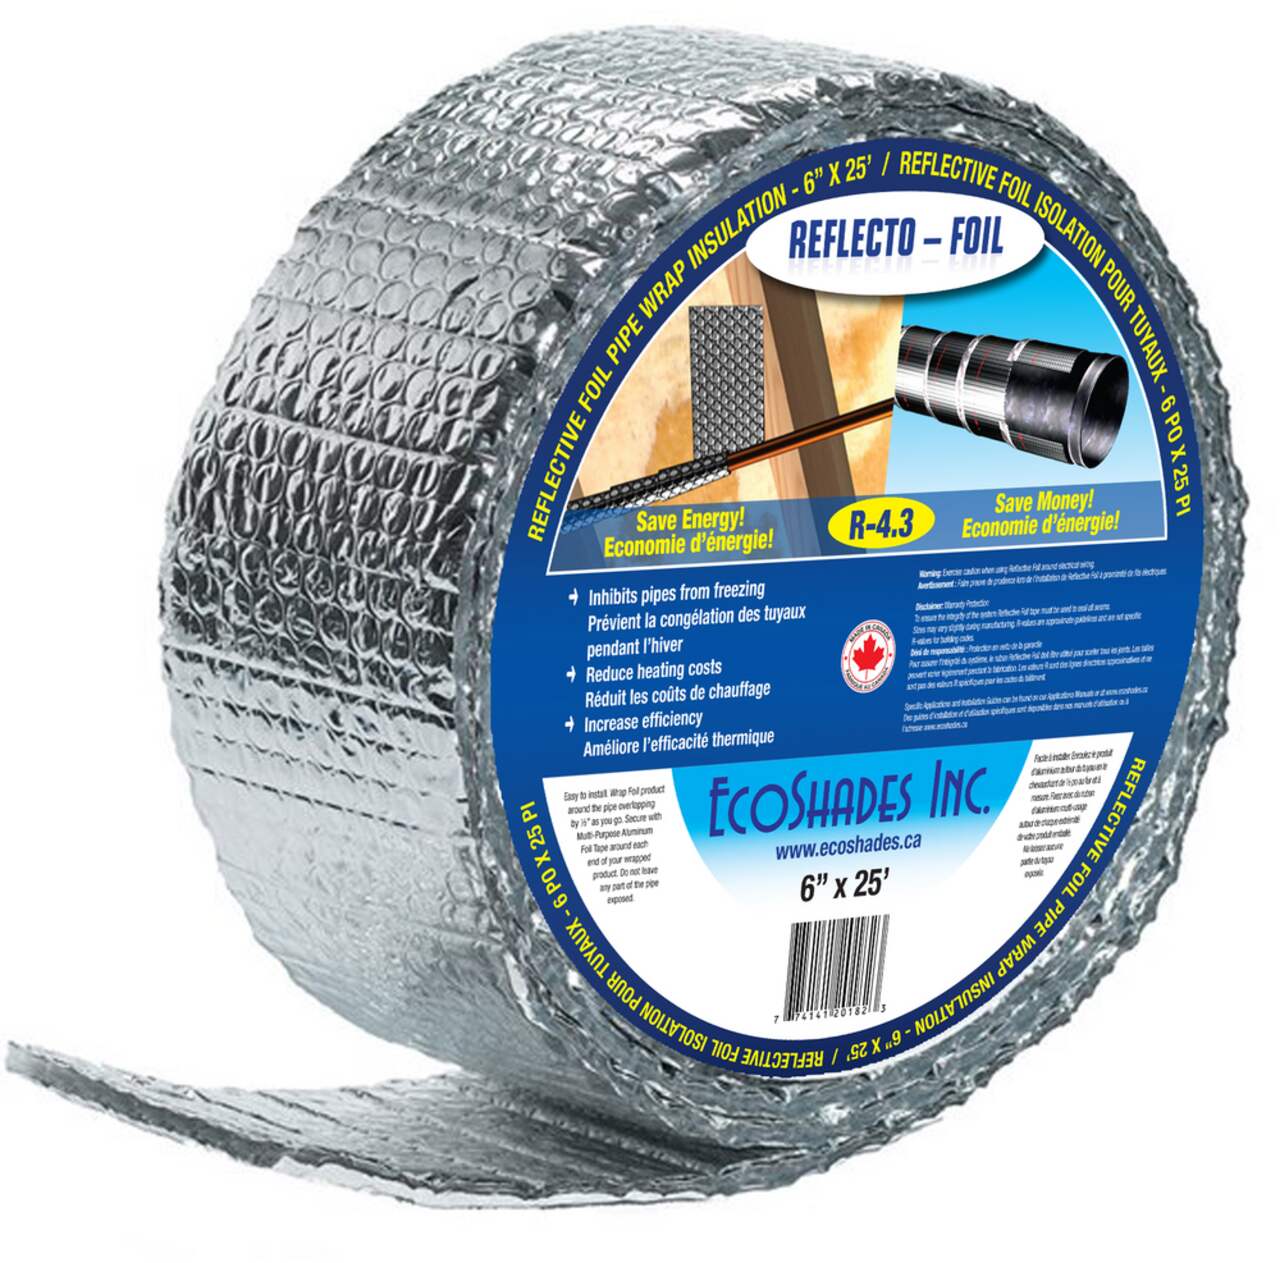 https://media-www.canadiantire.ca/product/fixing/plumbing/water-management/0631285/spiral-wrap-water-pipe-duct-6-x25--2d595c09-98e8-40e7-a0d8-c520932c0459.png?imdensity=1&imwidth=640&impolicy=mZoom